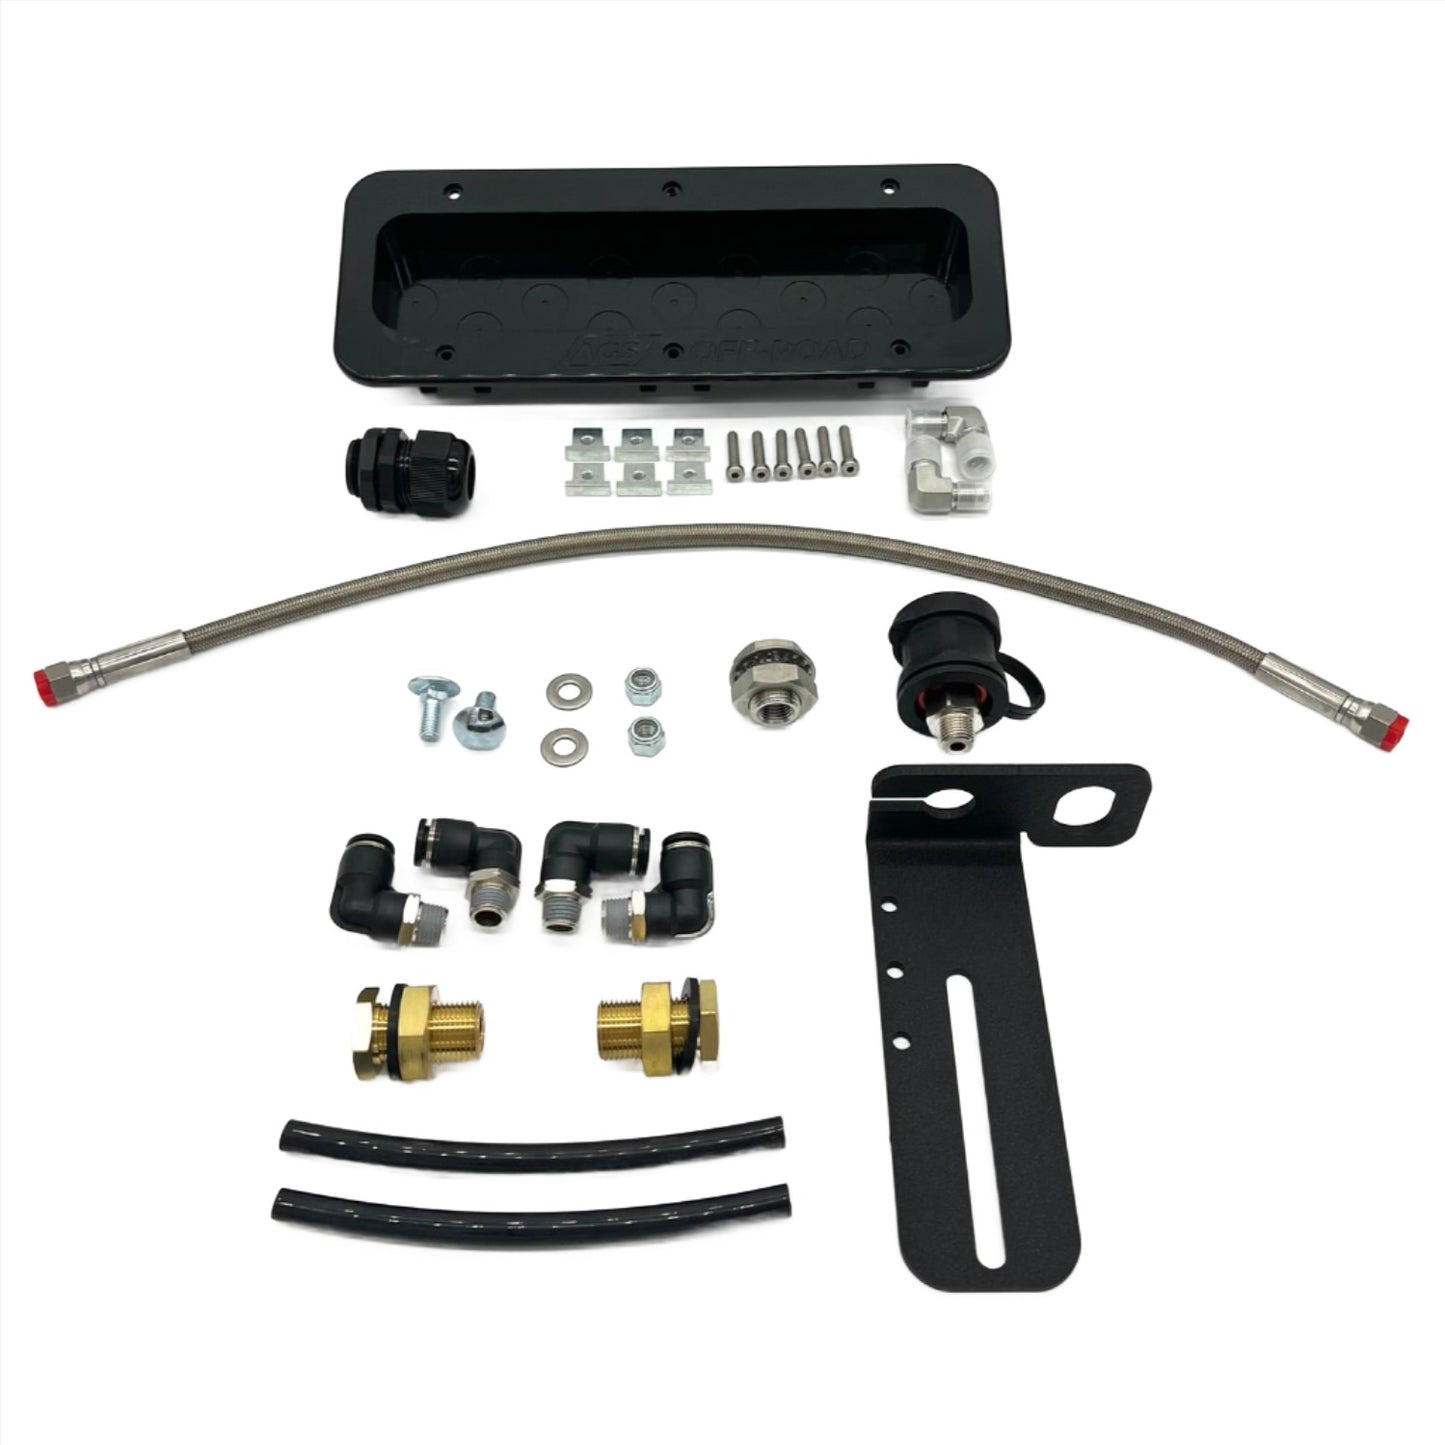 TGR Compressor Mounting Kit with Antenna/Chuck Mount